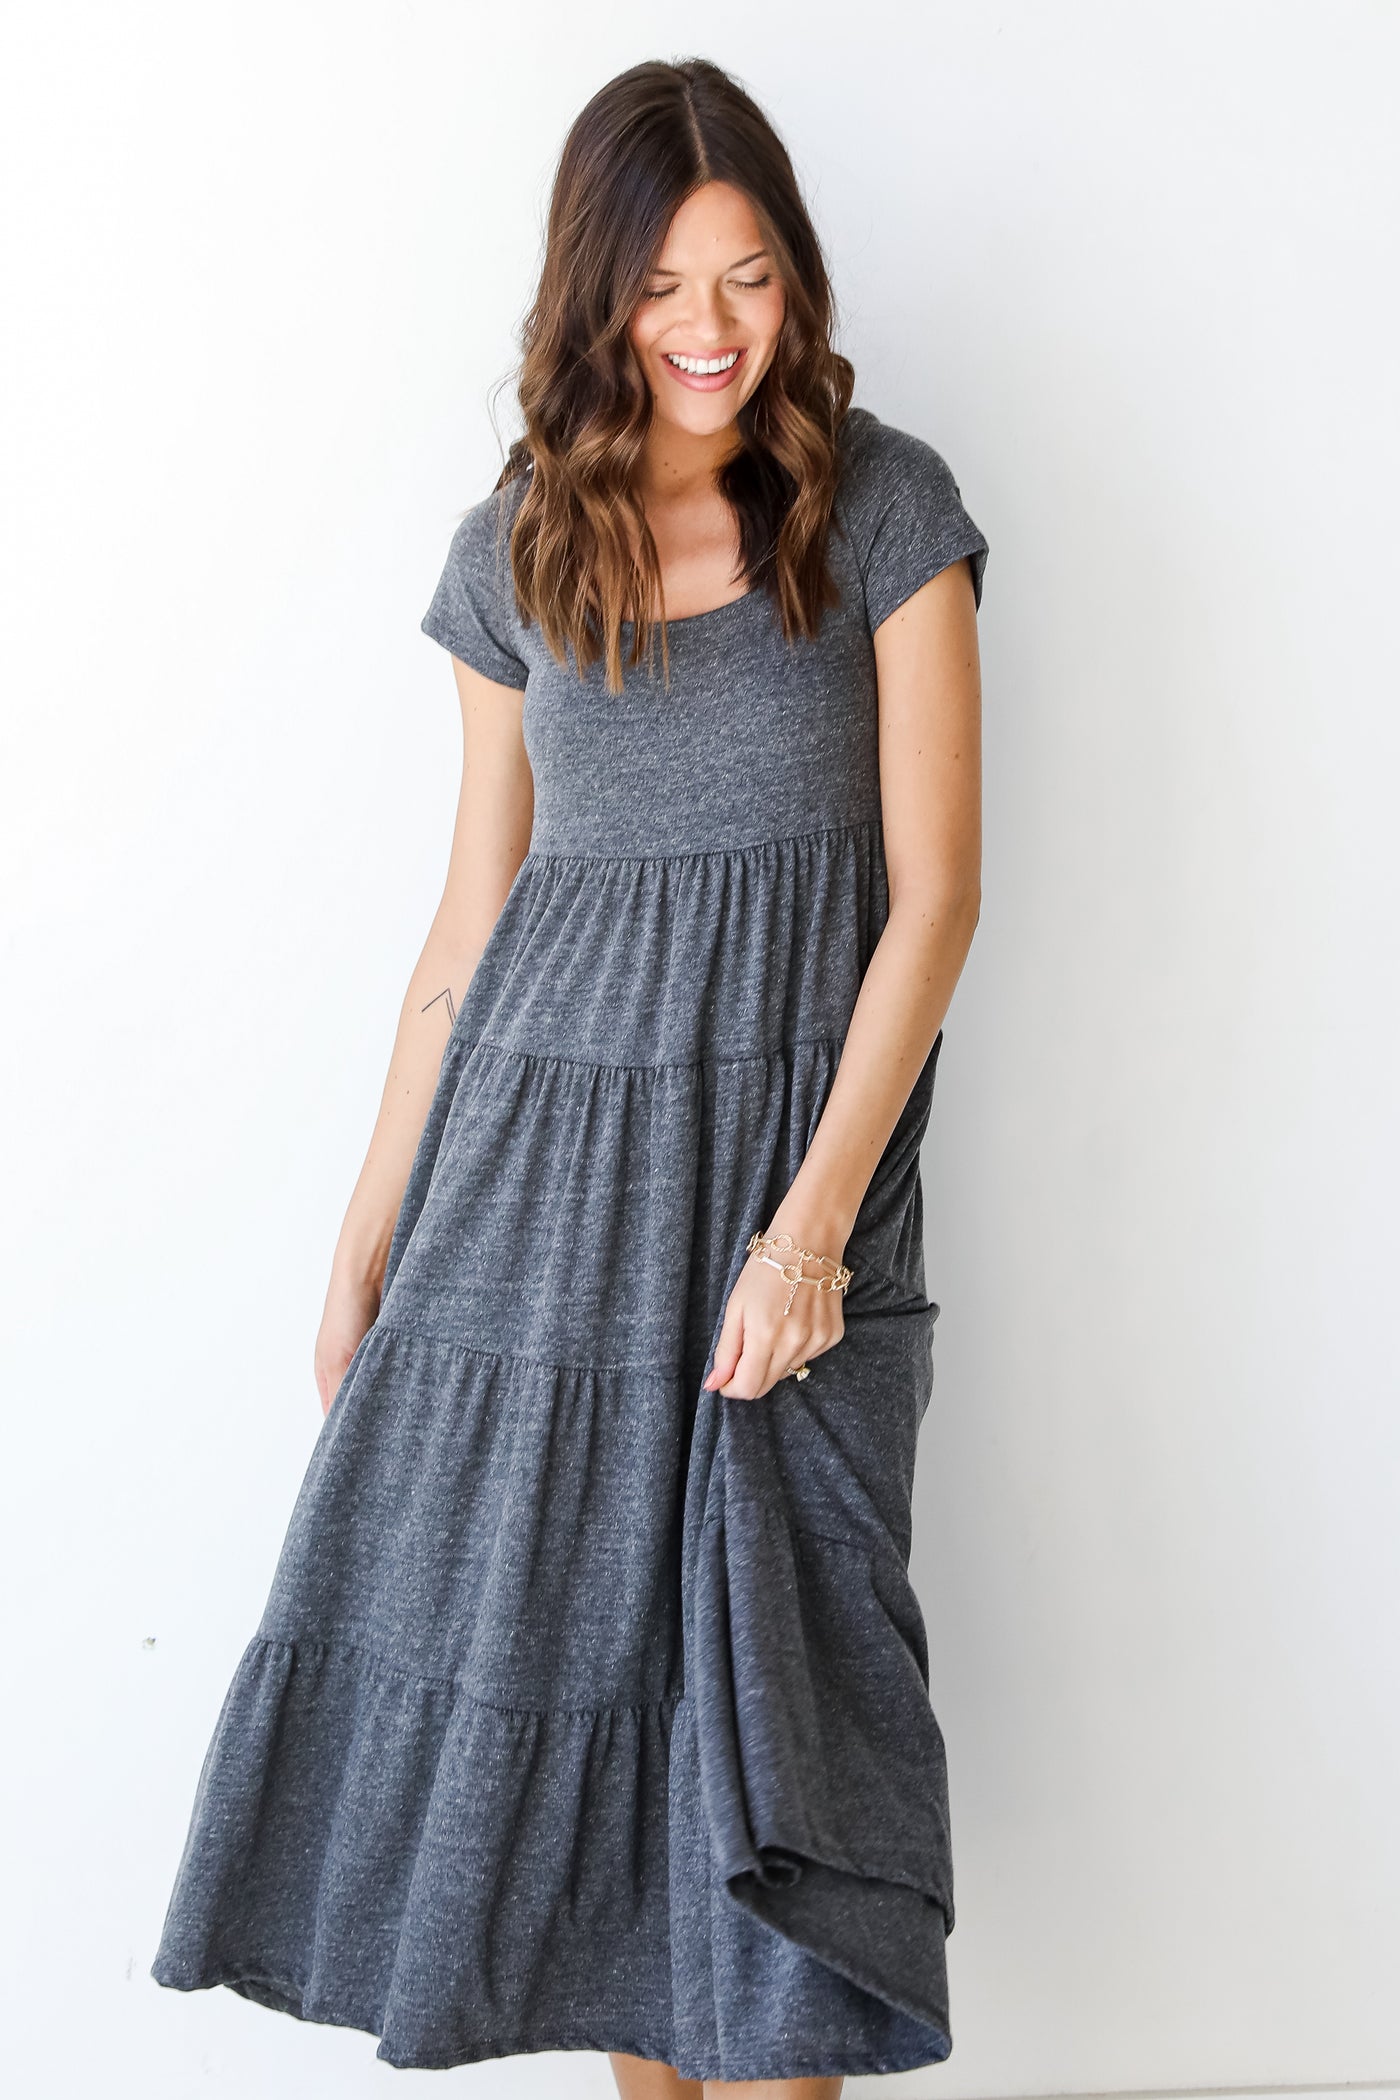 Tiered Maxi Dress in charcoal on model